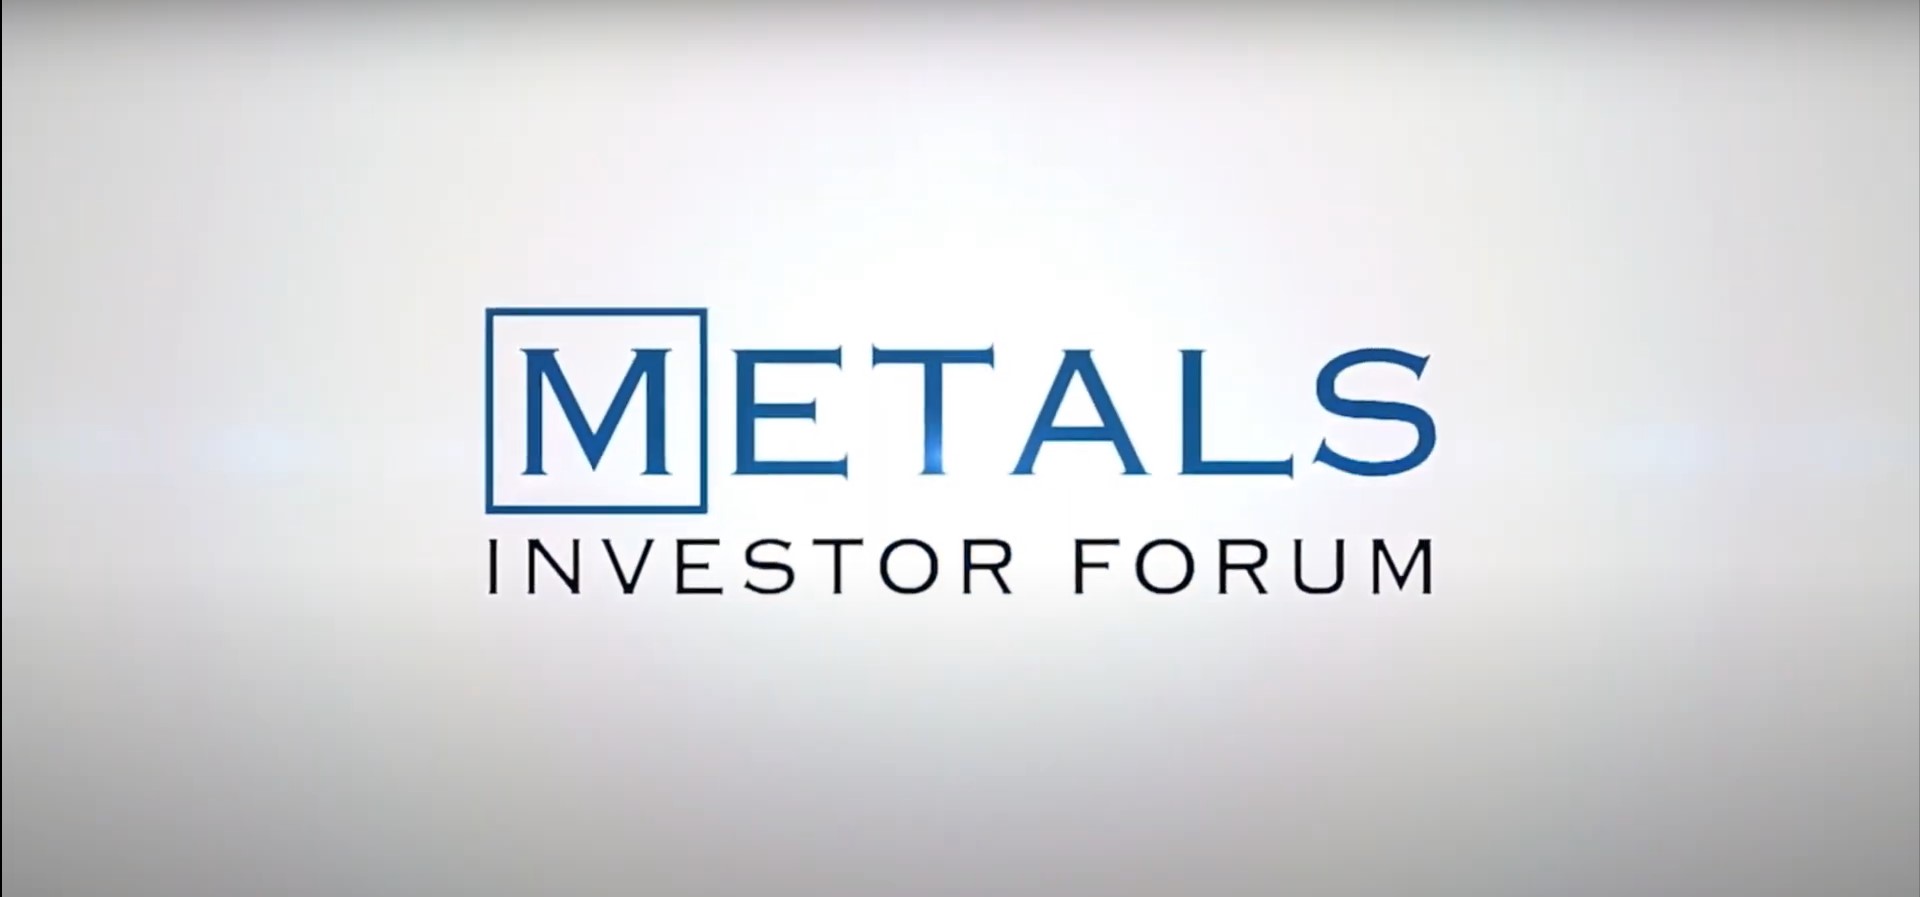 Bradley Rourke of Scottie Resources presents at the Virtual Metals Investor Forum on May 20, 2021